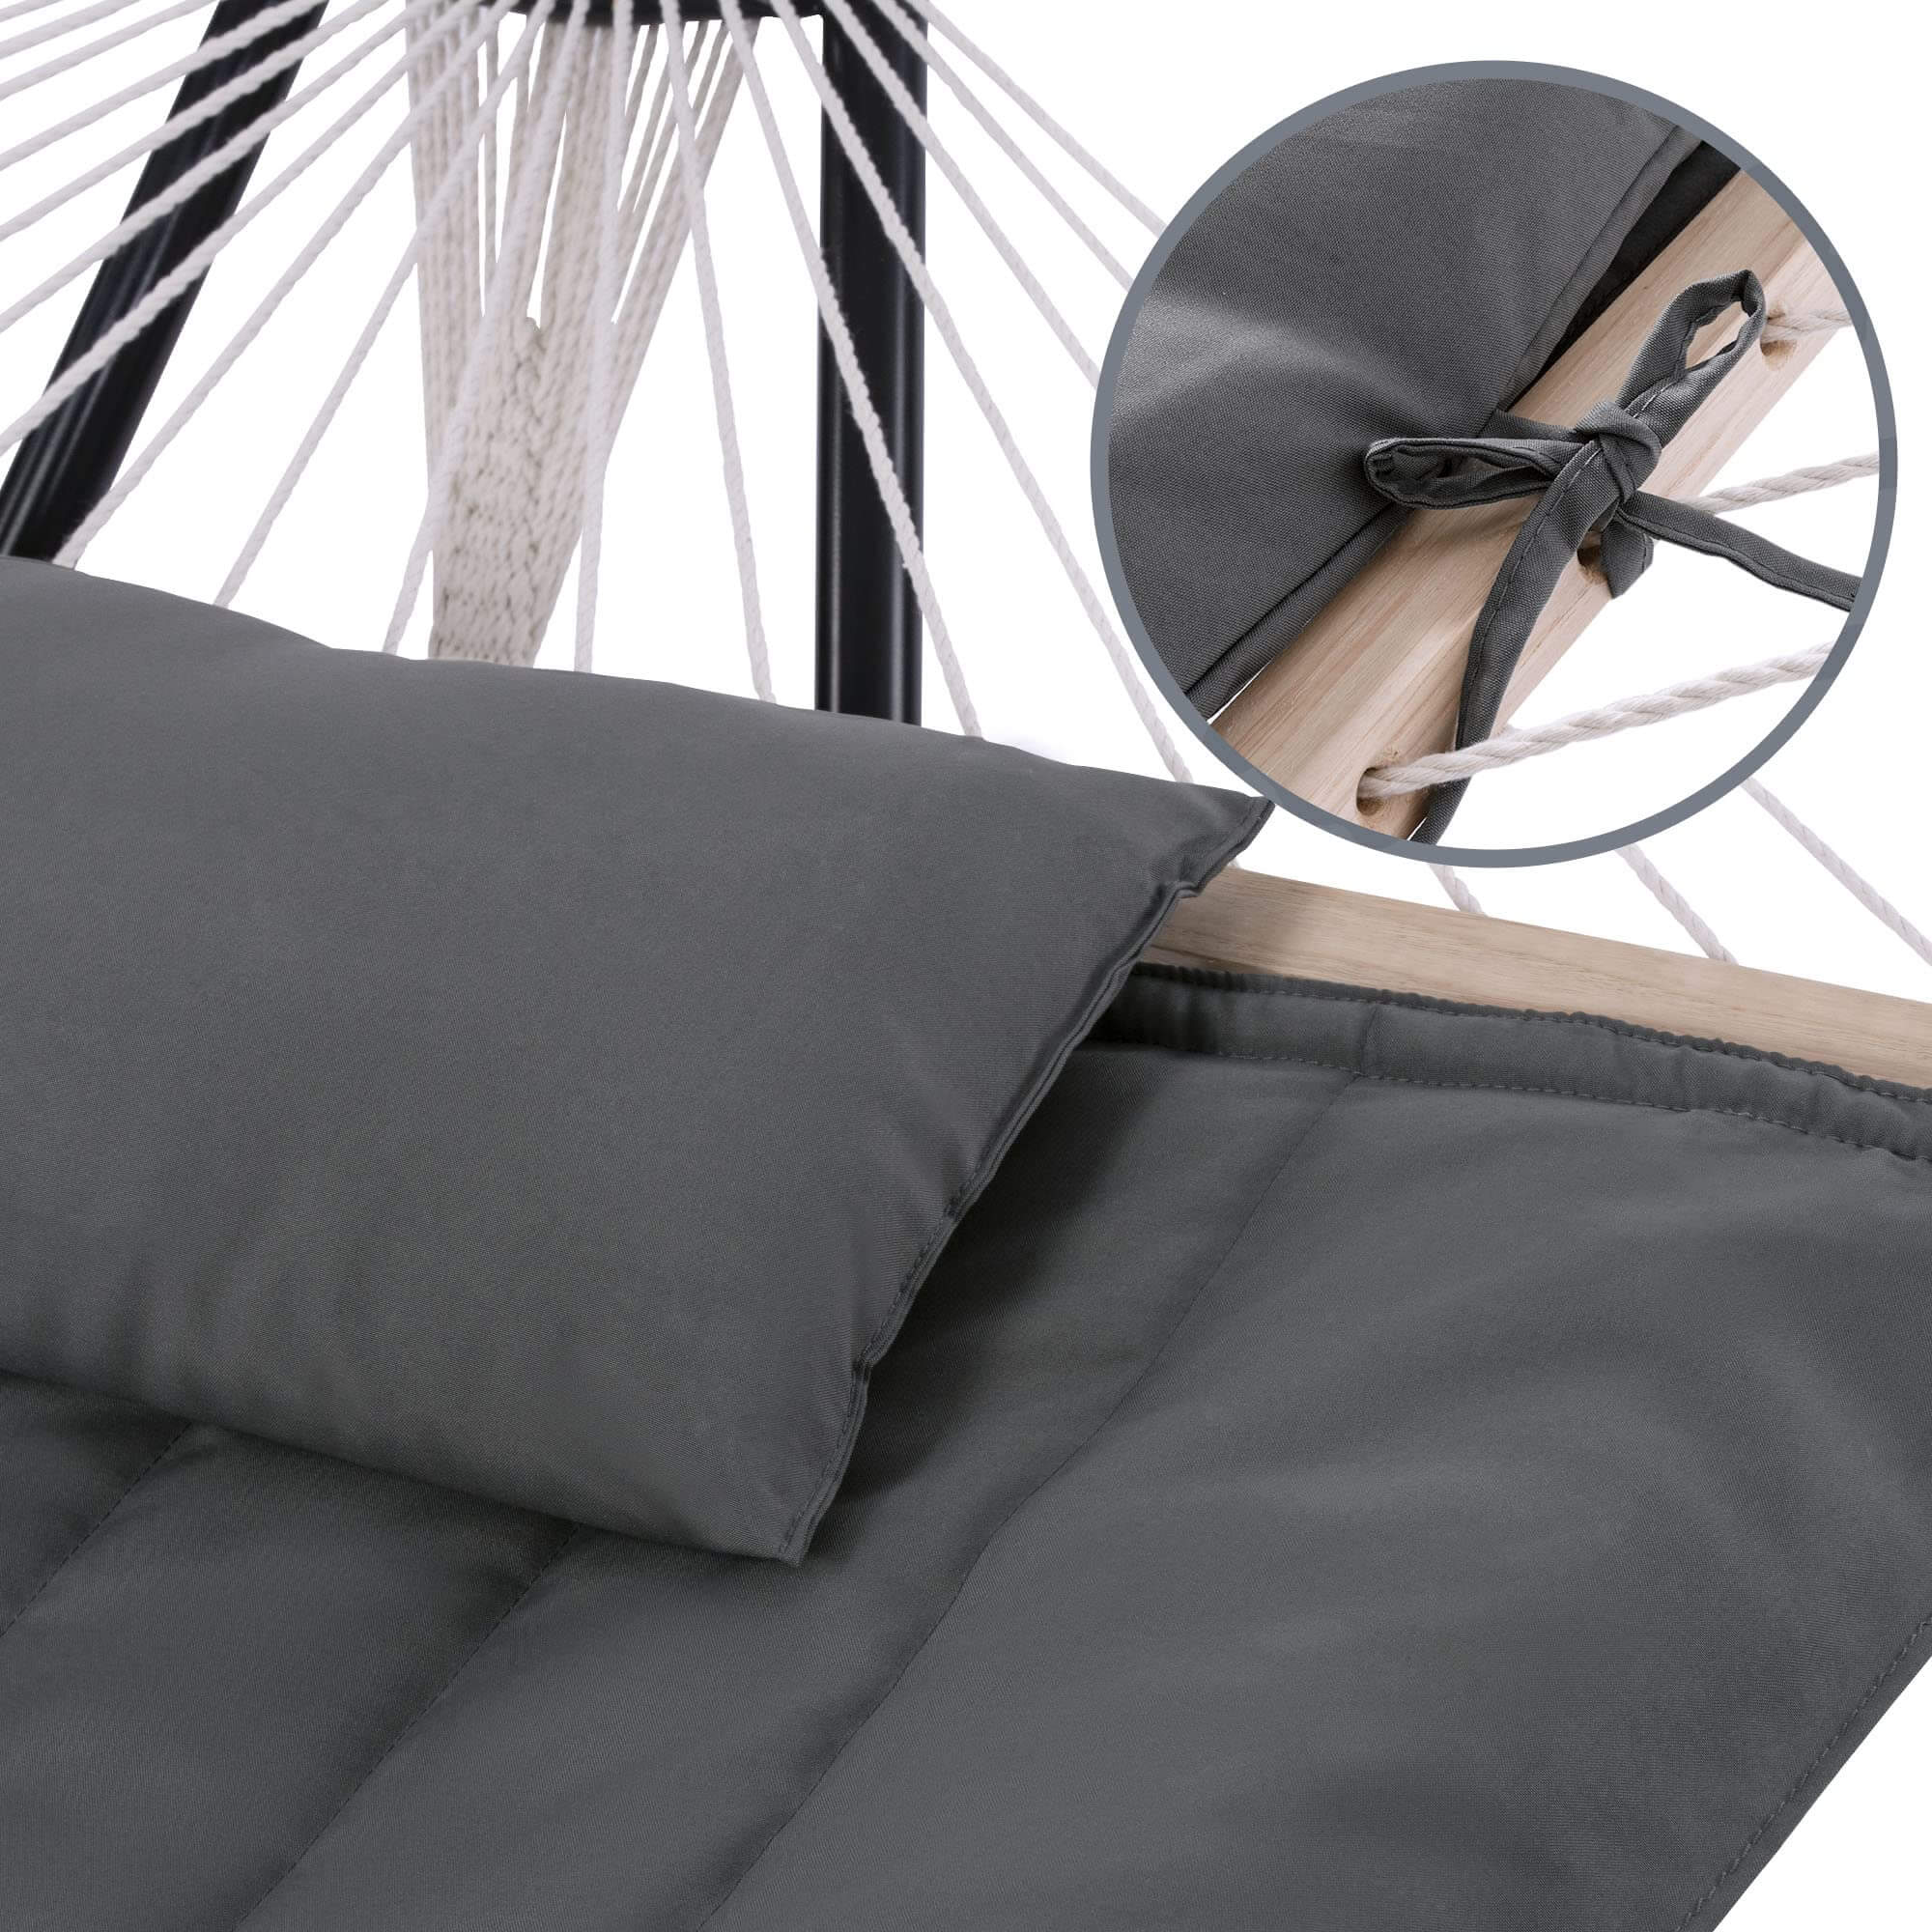 Double-Hammocks-with-Universal-Multi-Use-Steel-Stand#color_dark-gray